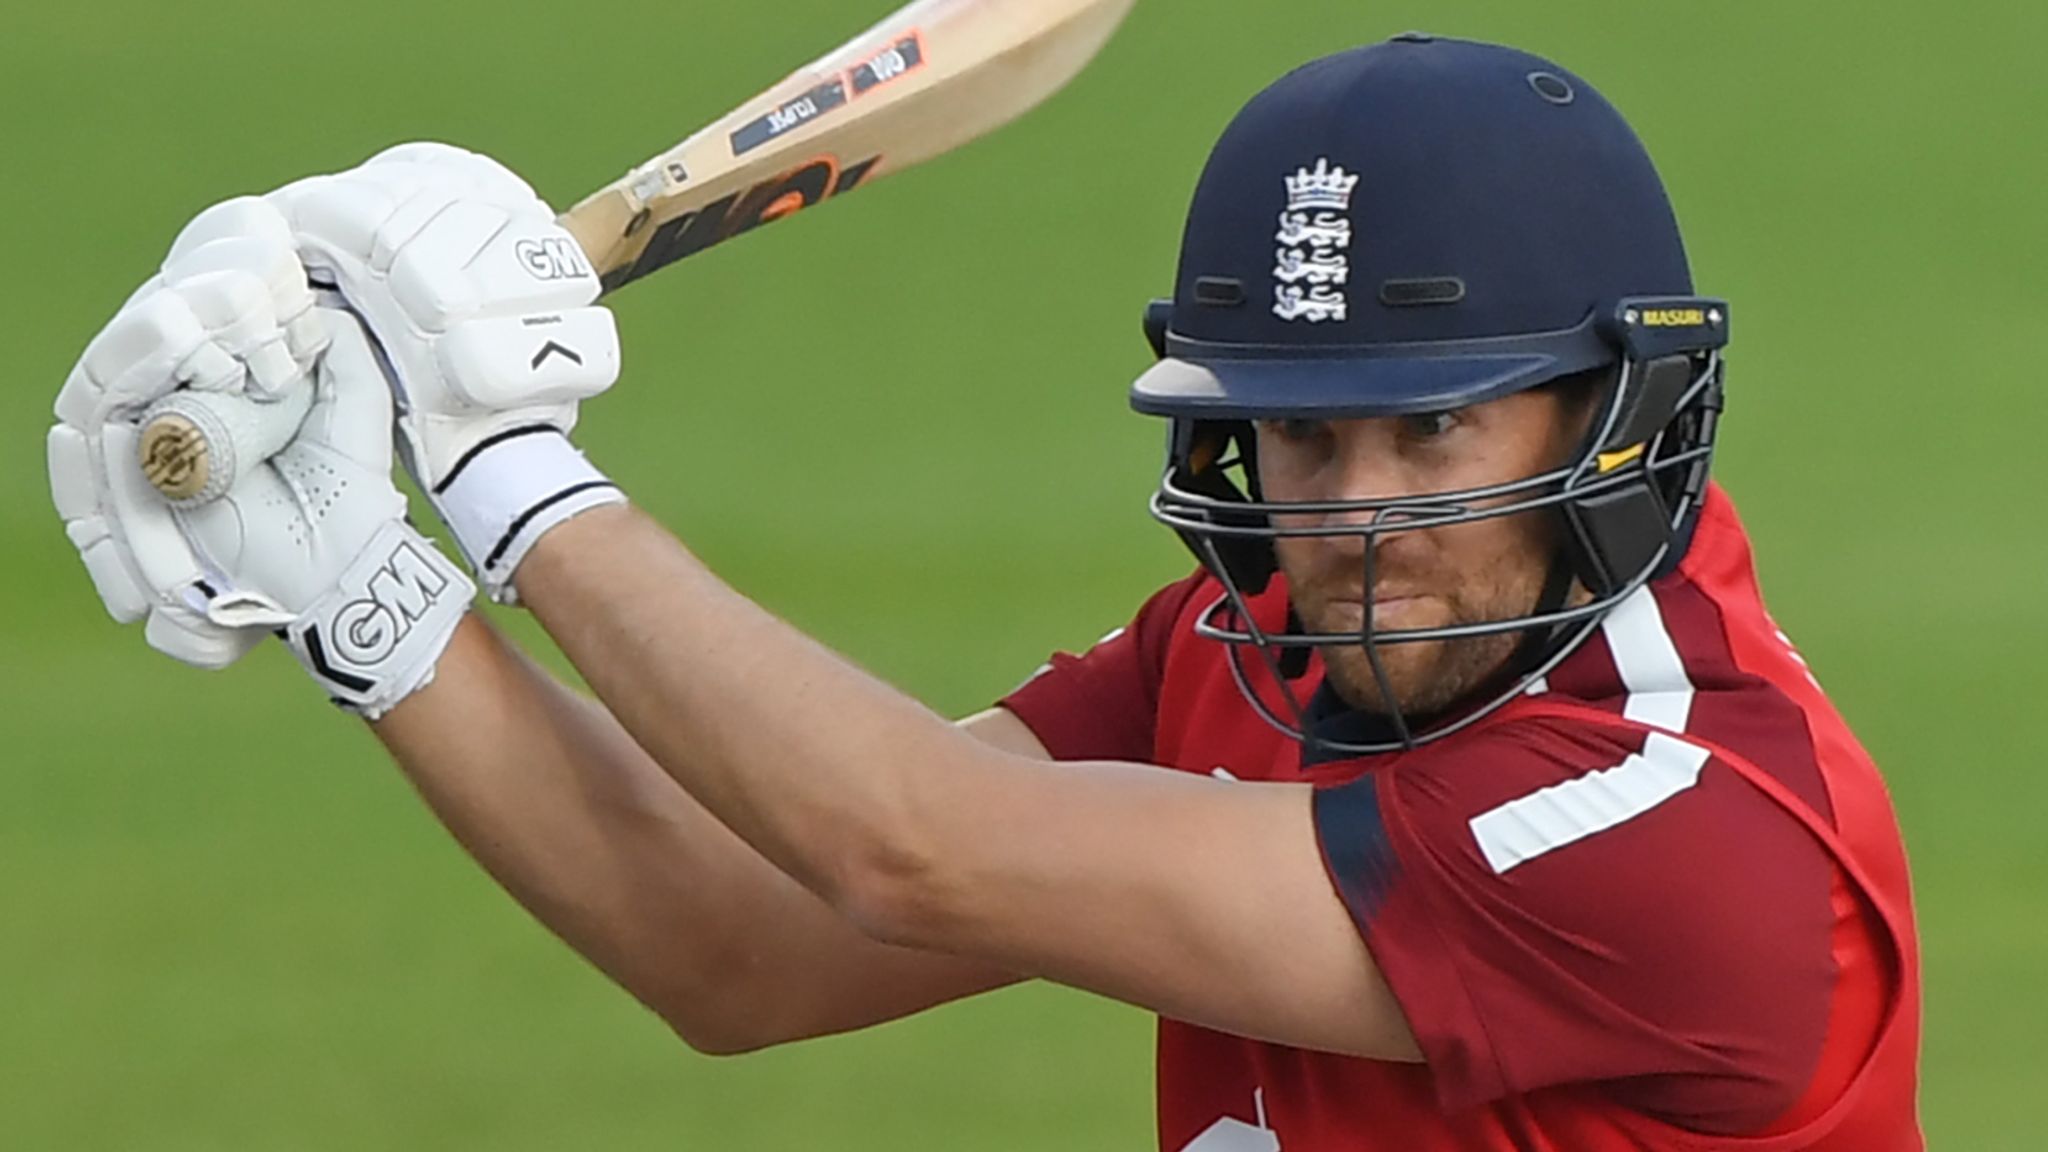 Dawid Malan delivers for England every time he bats in T20, says Nasser Hussain | Cricket News | Sky Sports